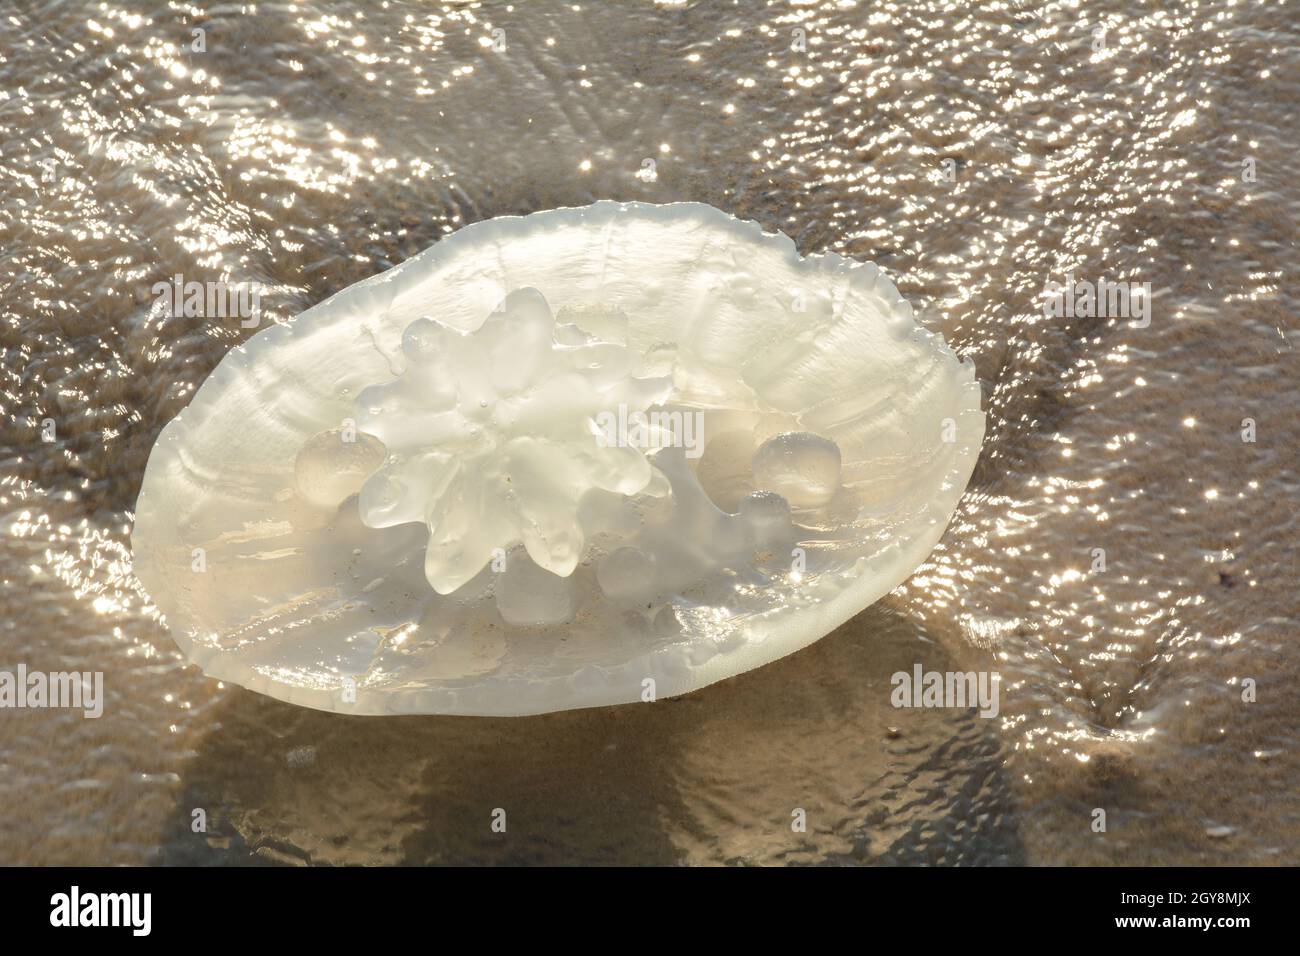 Rhopilema nomadica jellyfish at the Mediterranean seacoast.  Vermicular filaments with venomous stinging cells  can cause painful injuries to people. Stock Photo